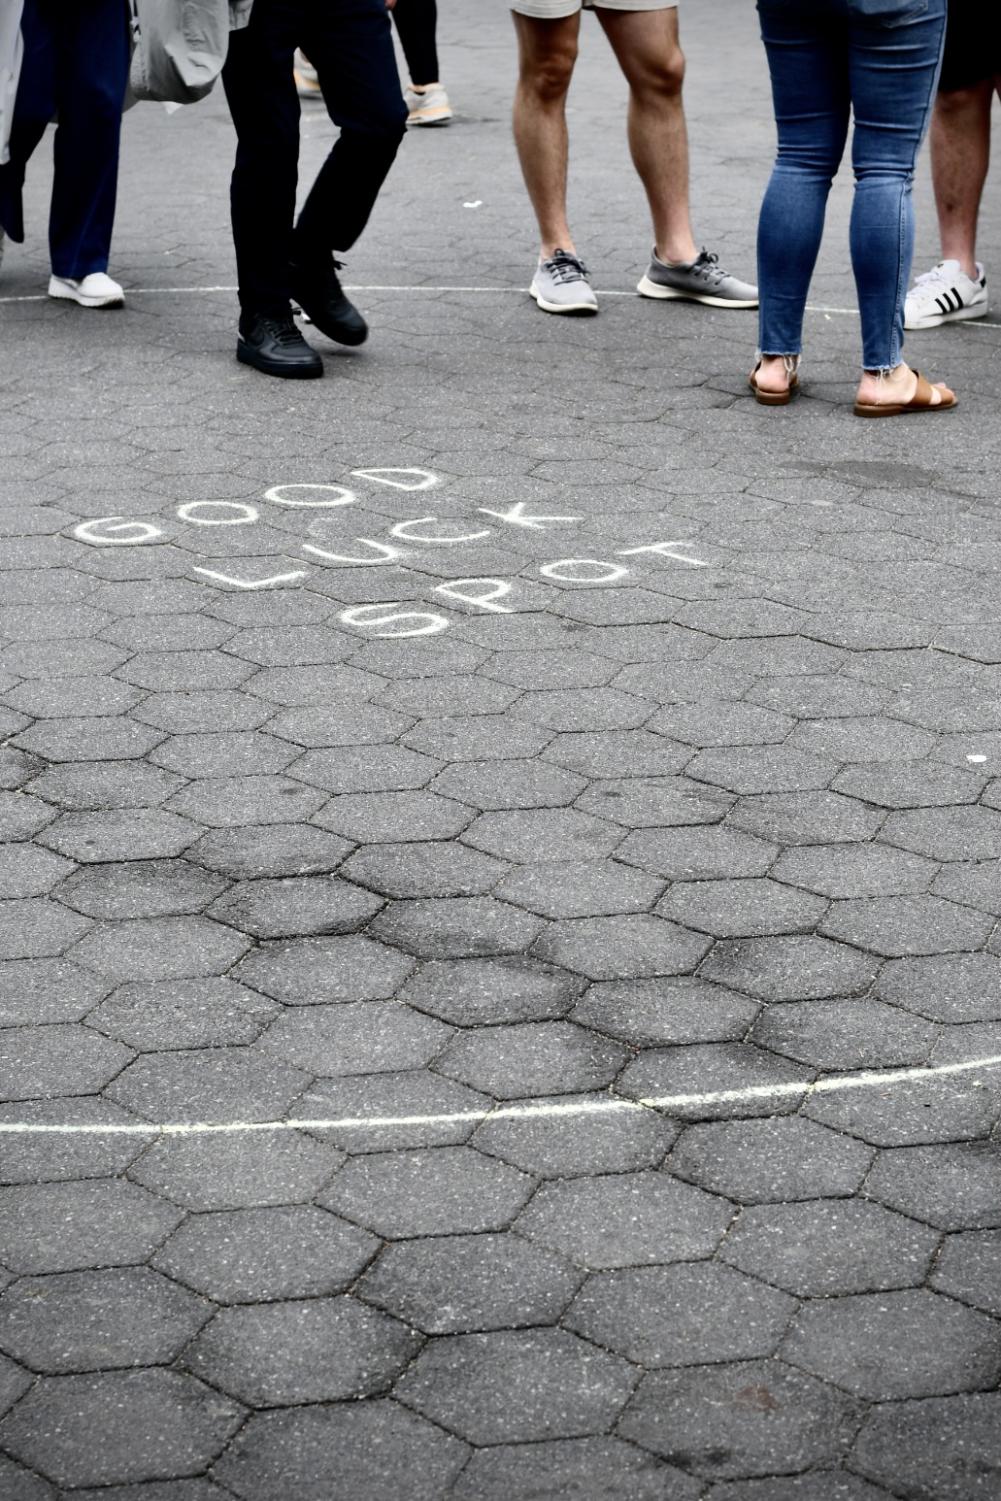 On concrete, a yellow chalk drawing of a circle that reads “Good Luck Spot” inside. The feet of people who are standing in the circle are visible.